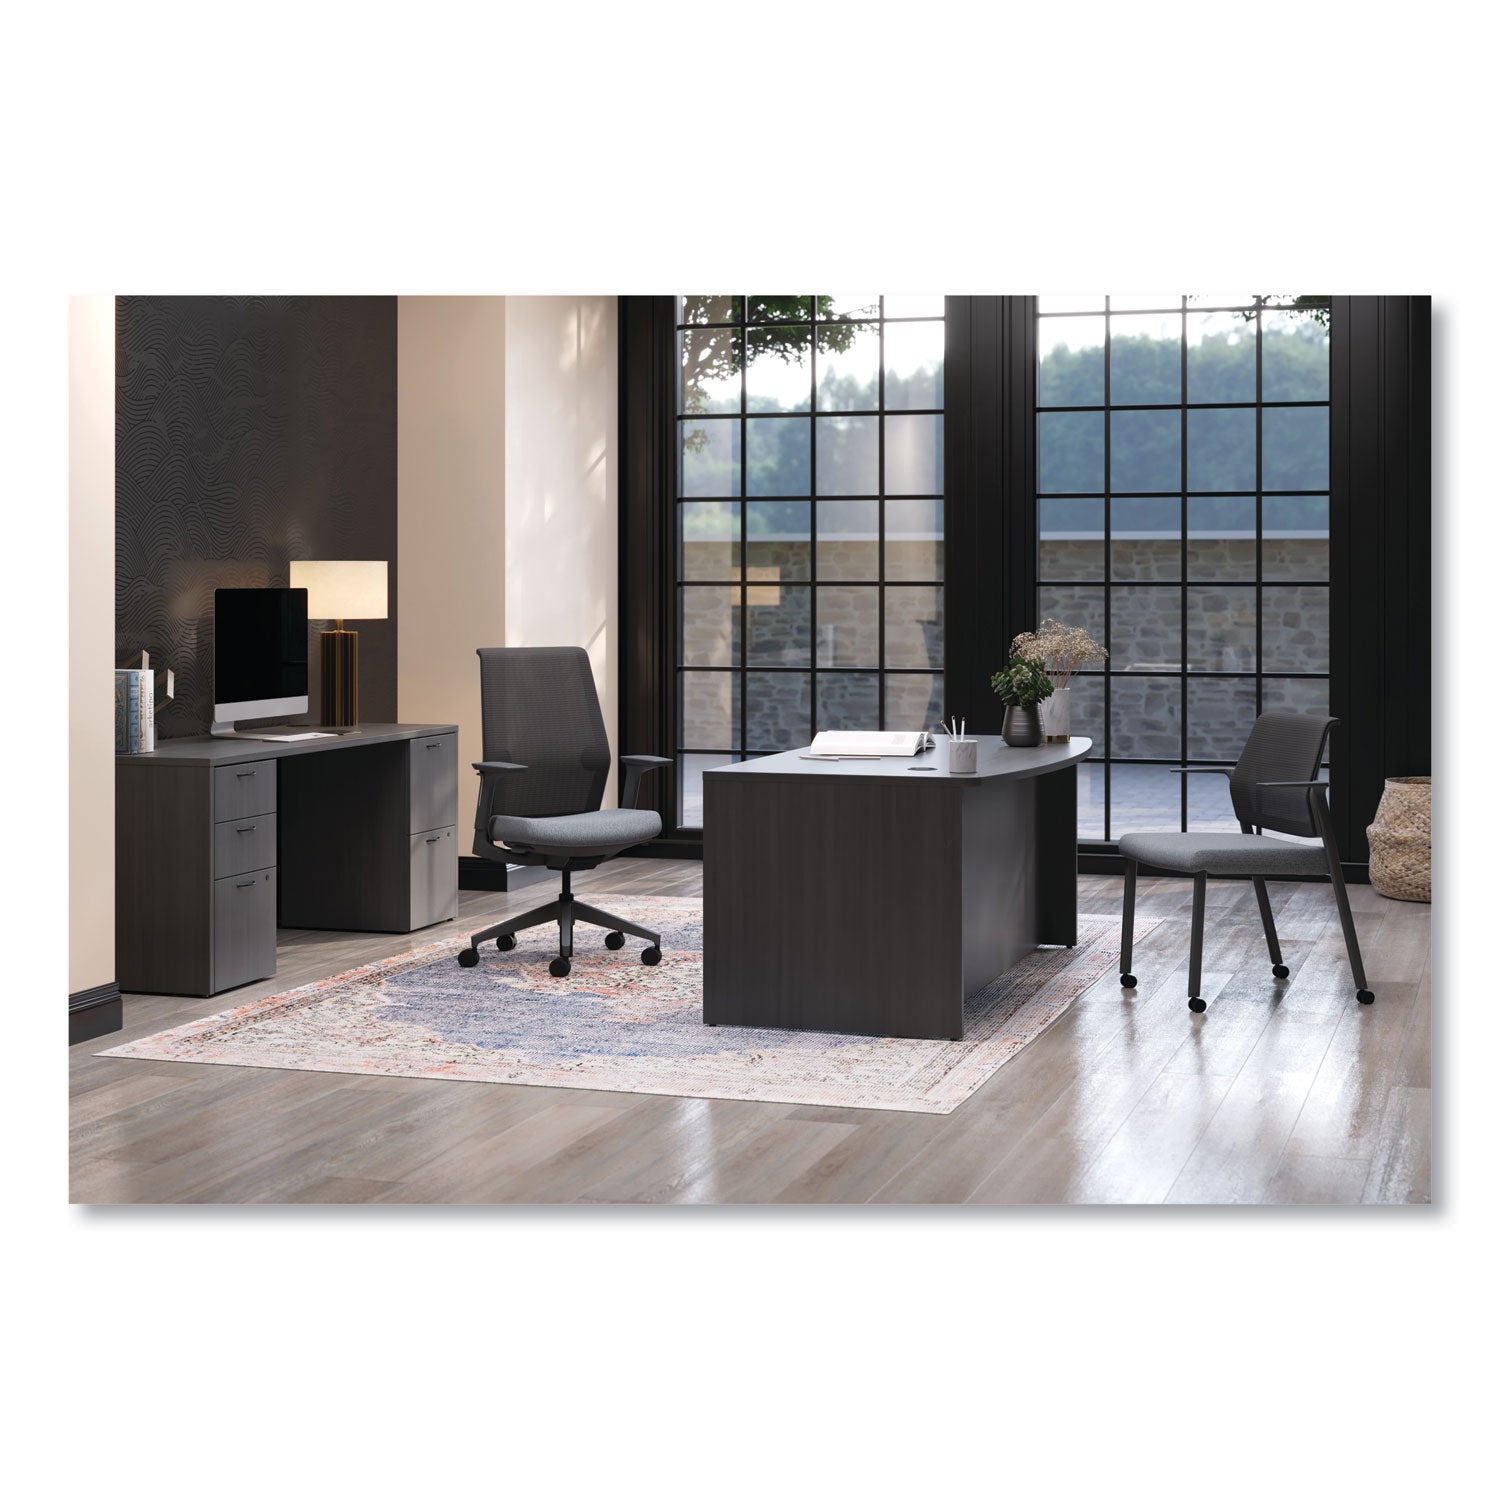 cipher-mesh-back-guest-chair-2425-x-2413-x-335-black-seat-charcoal-back-charcoal-base-ships-in-7-10-business-days_honcfrgfhcc10p7 - 3